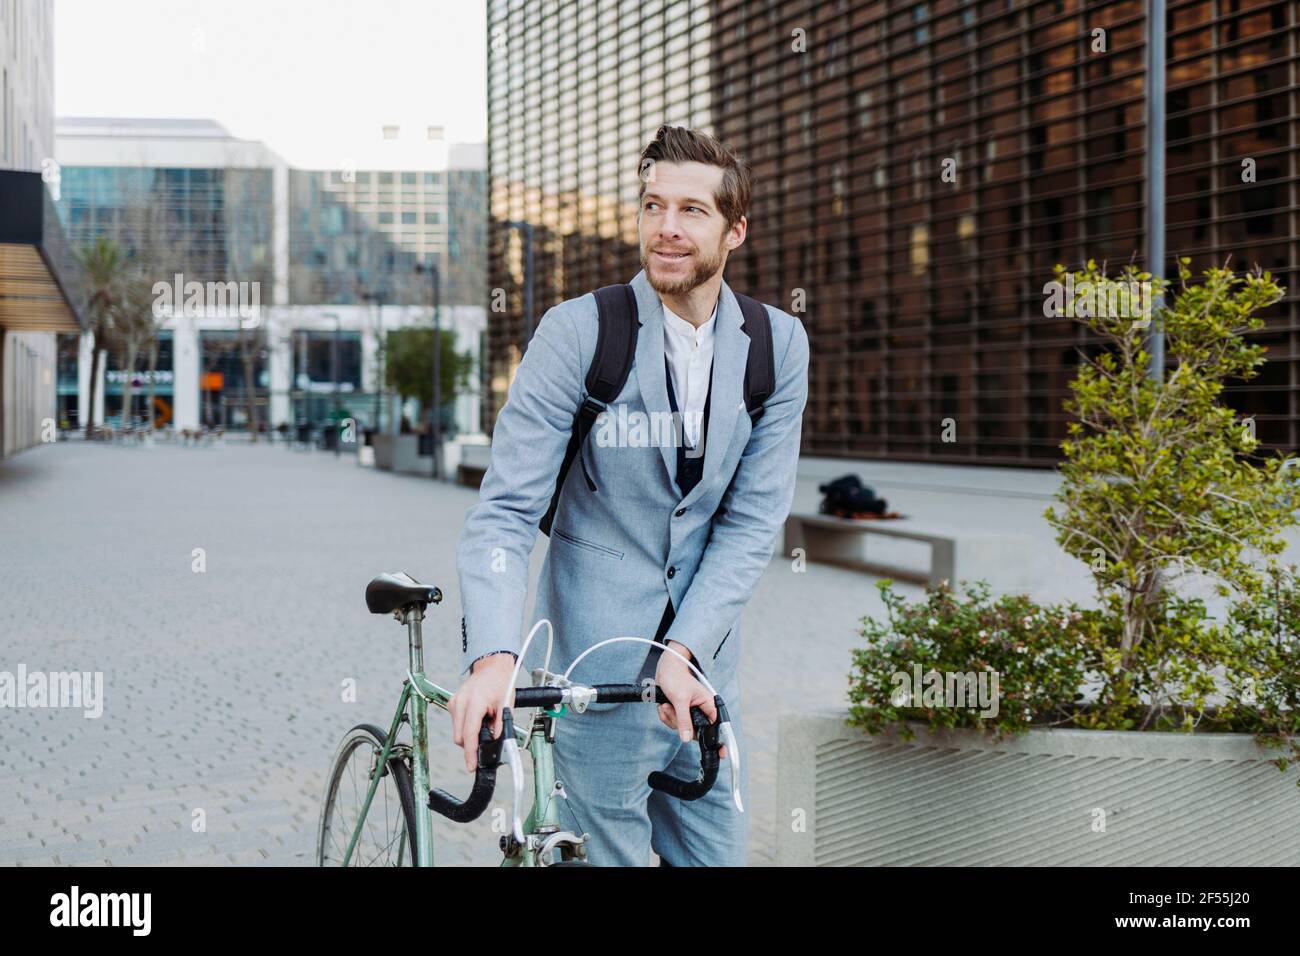 Male commuter wearing back pack walking with bicycle on road in city Stock Photo